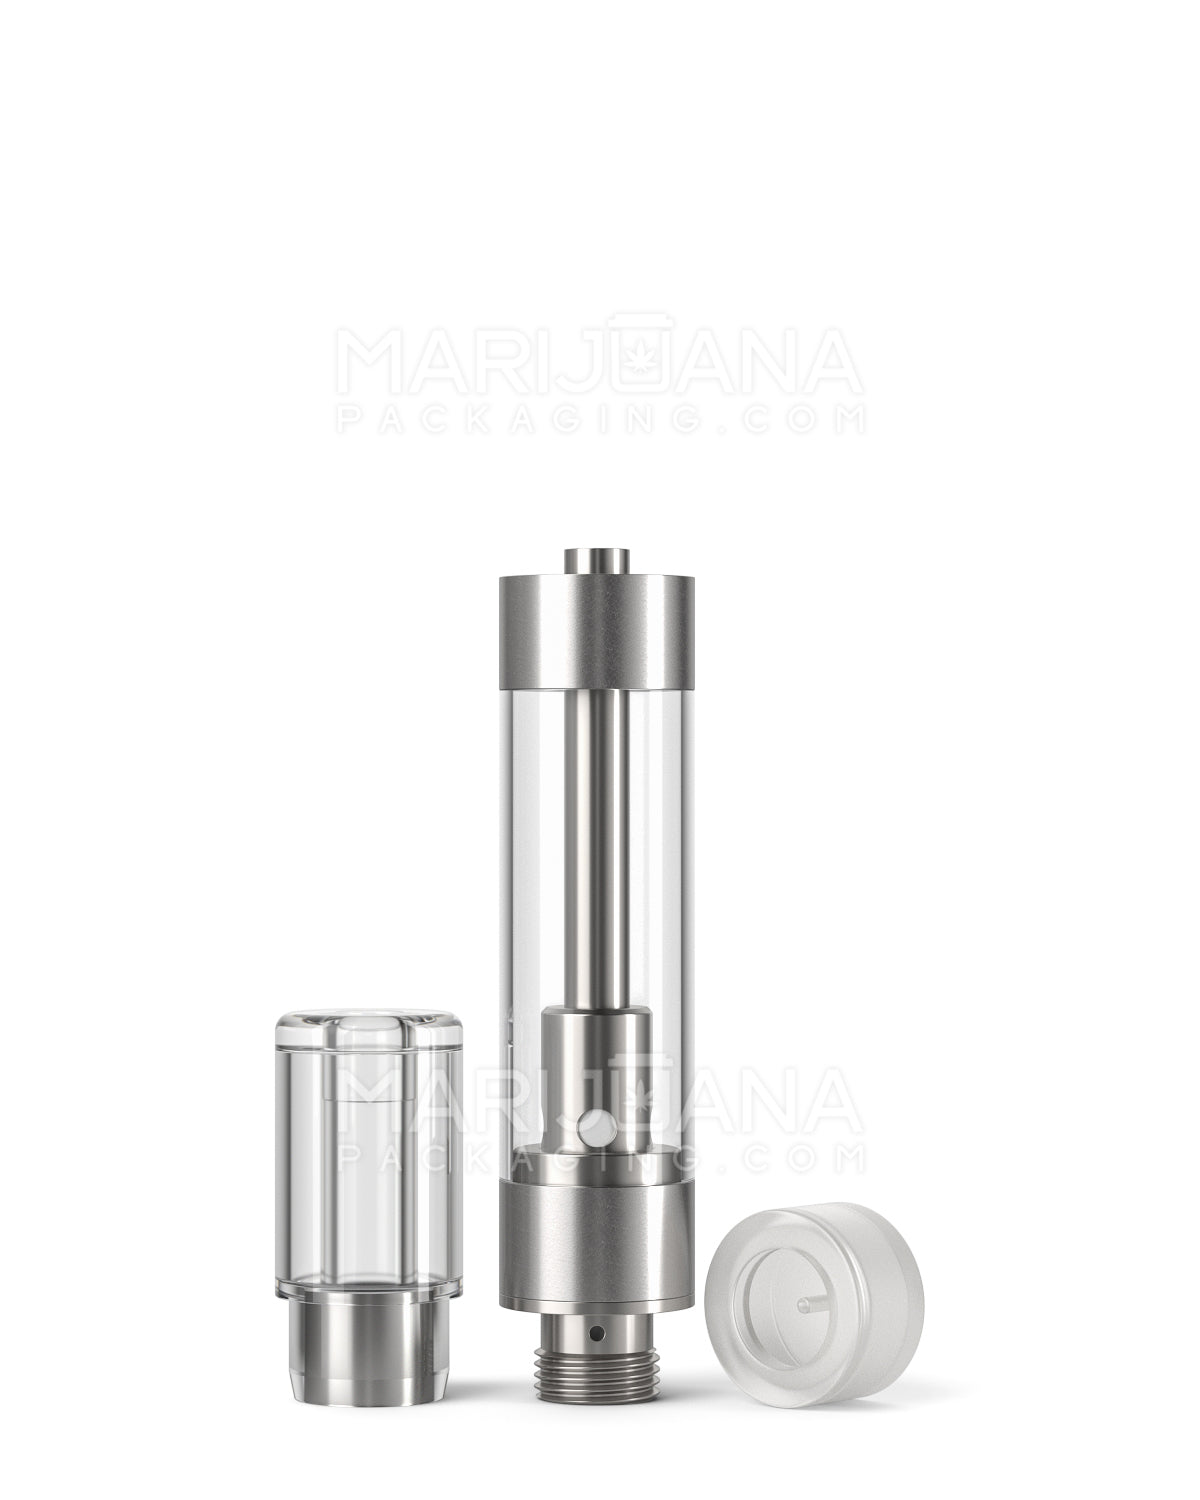 CCELL | Liquid6 Reactor Plastic Vape Cartridge with Barrel Clear Plastic Mouthpiece | 1mL - Press On - 100 Count - 5